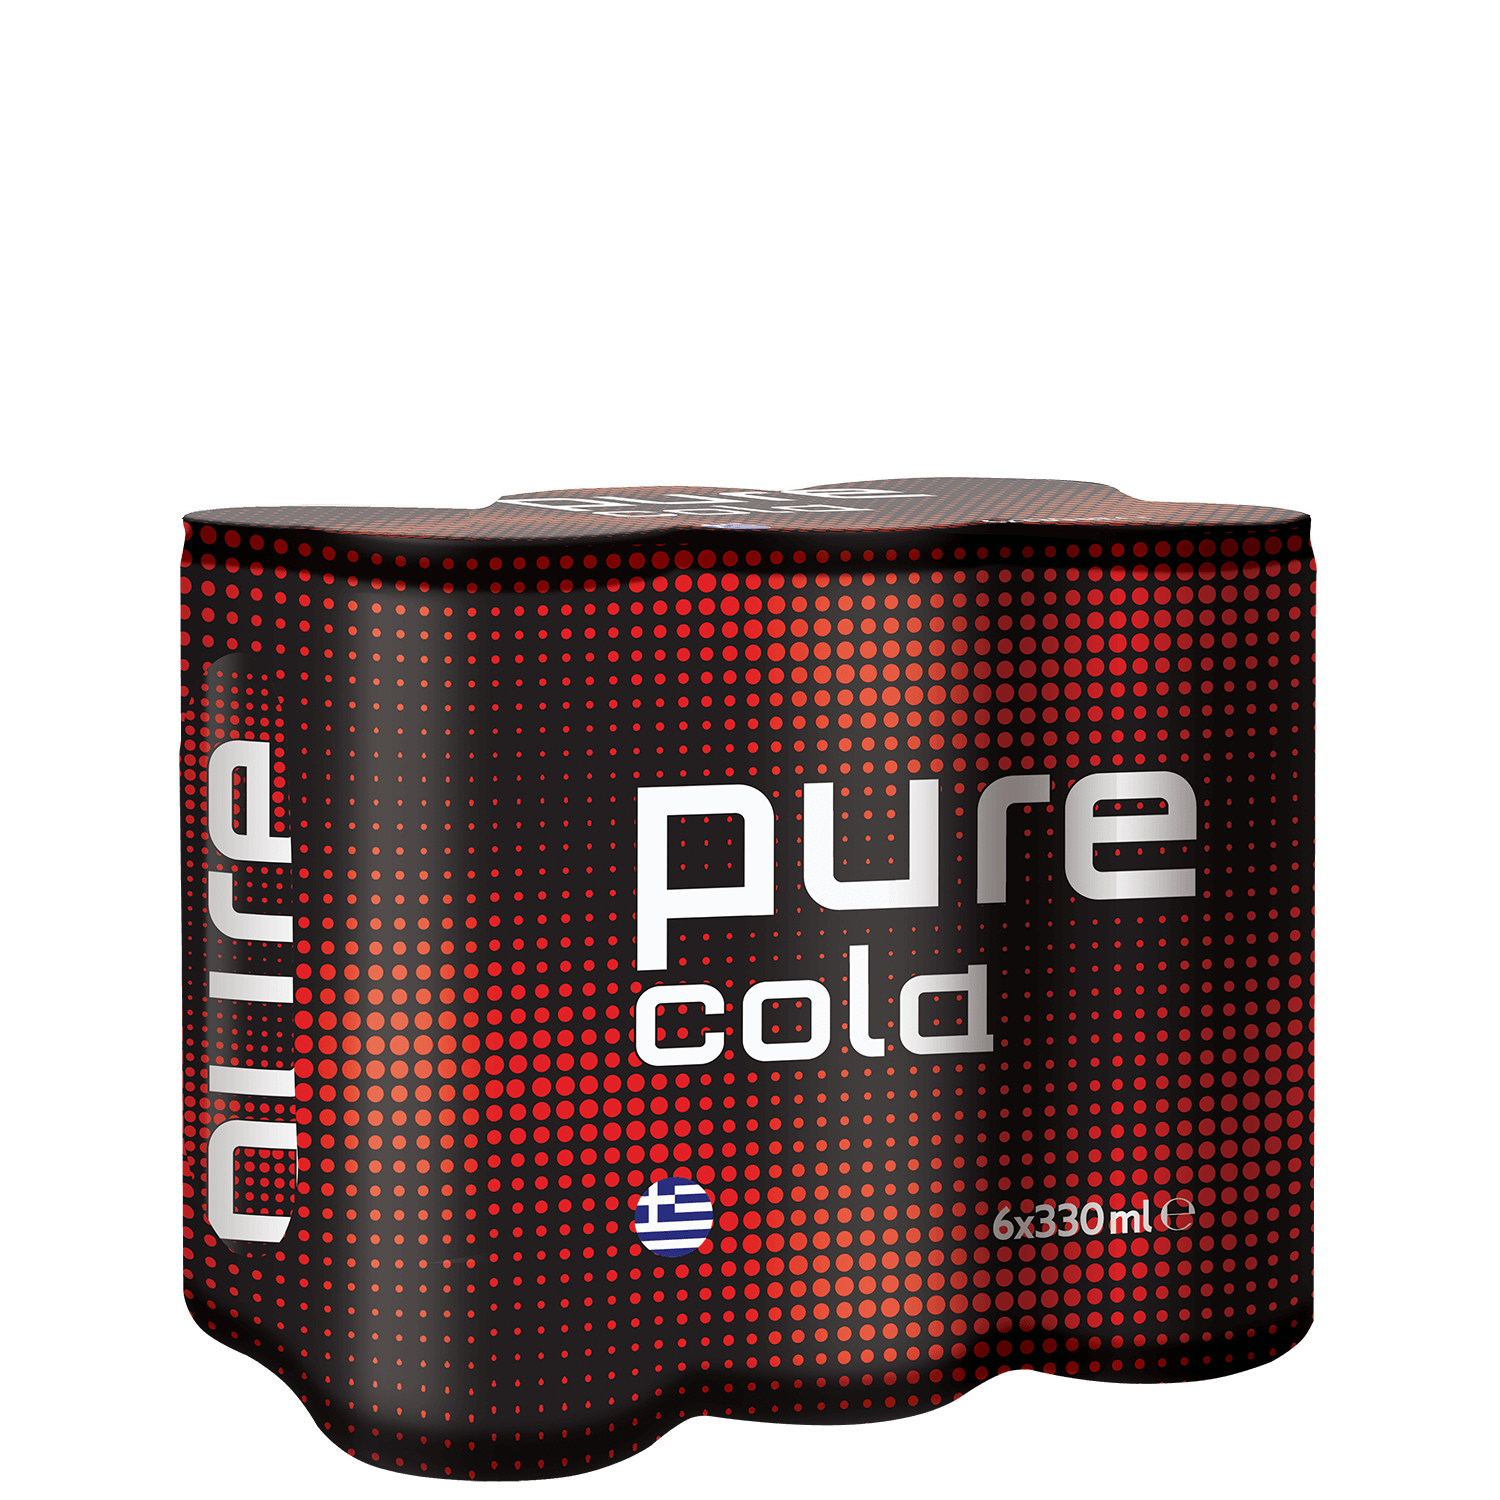 Pure - 6x330ml - Multi Pack cans